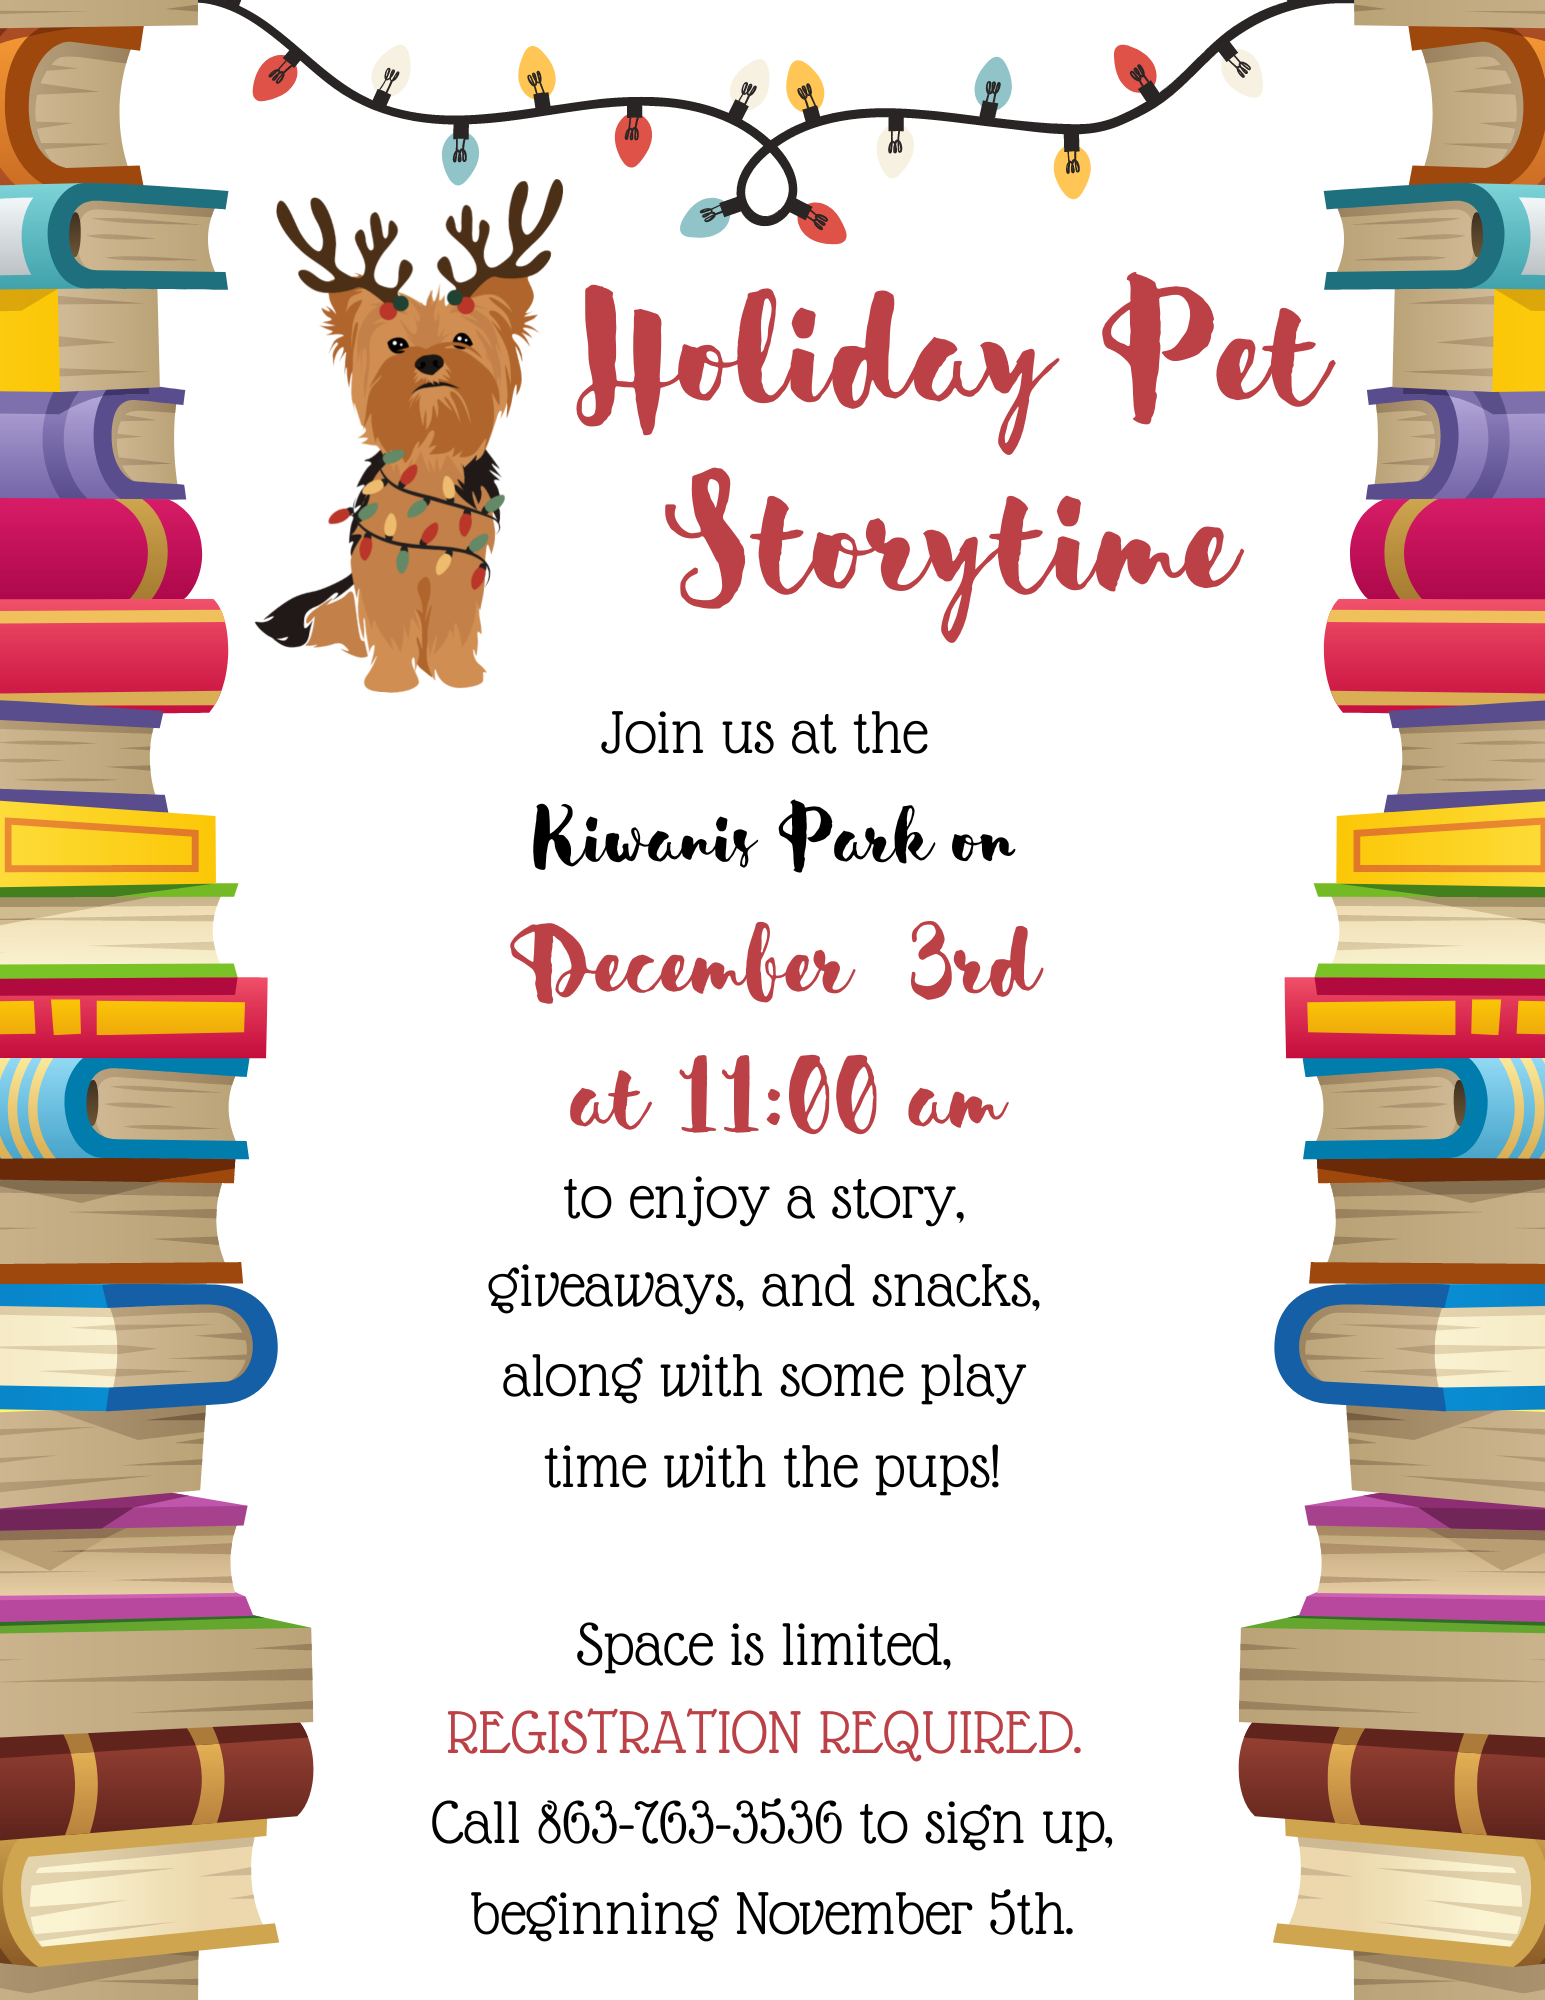 Come on out and join the Okeechobee Library for a storytime with our pet friends from the Okeechobee Animal Shelter at Kiwanis Park, Saturday, December 3rd @ 10:00 a.m.